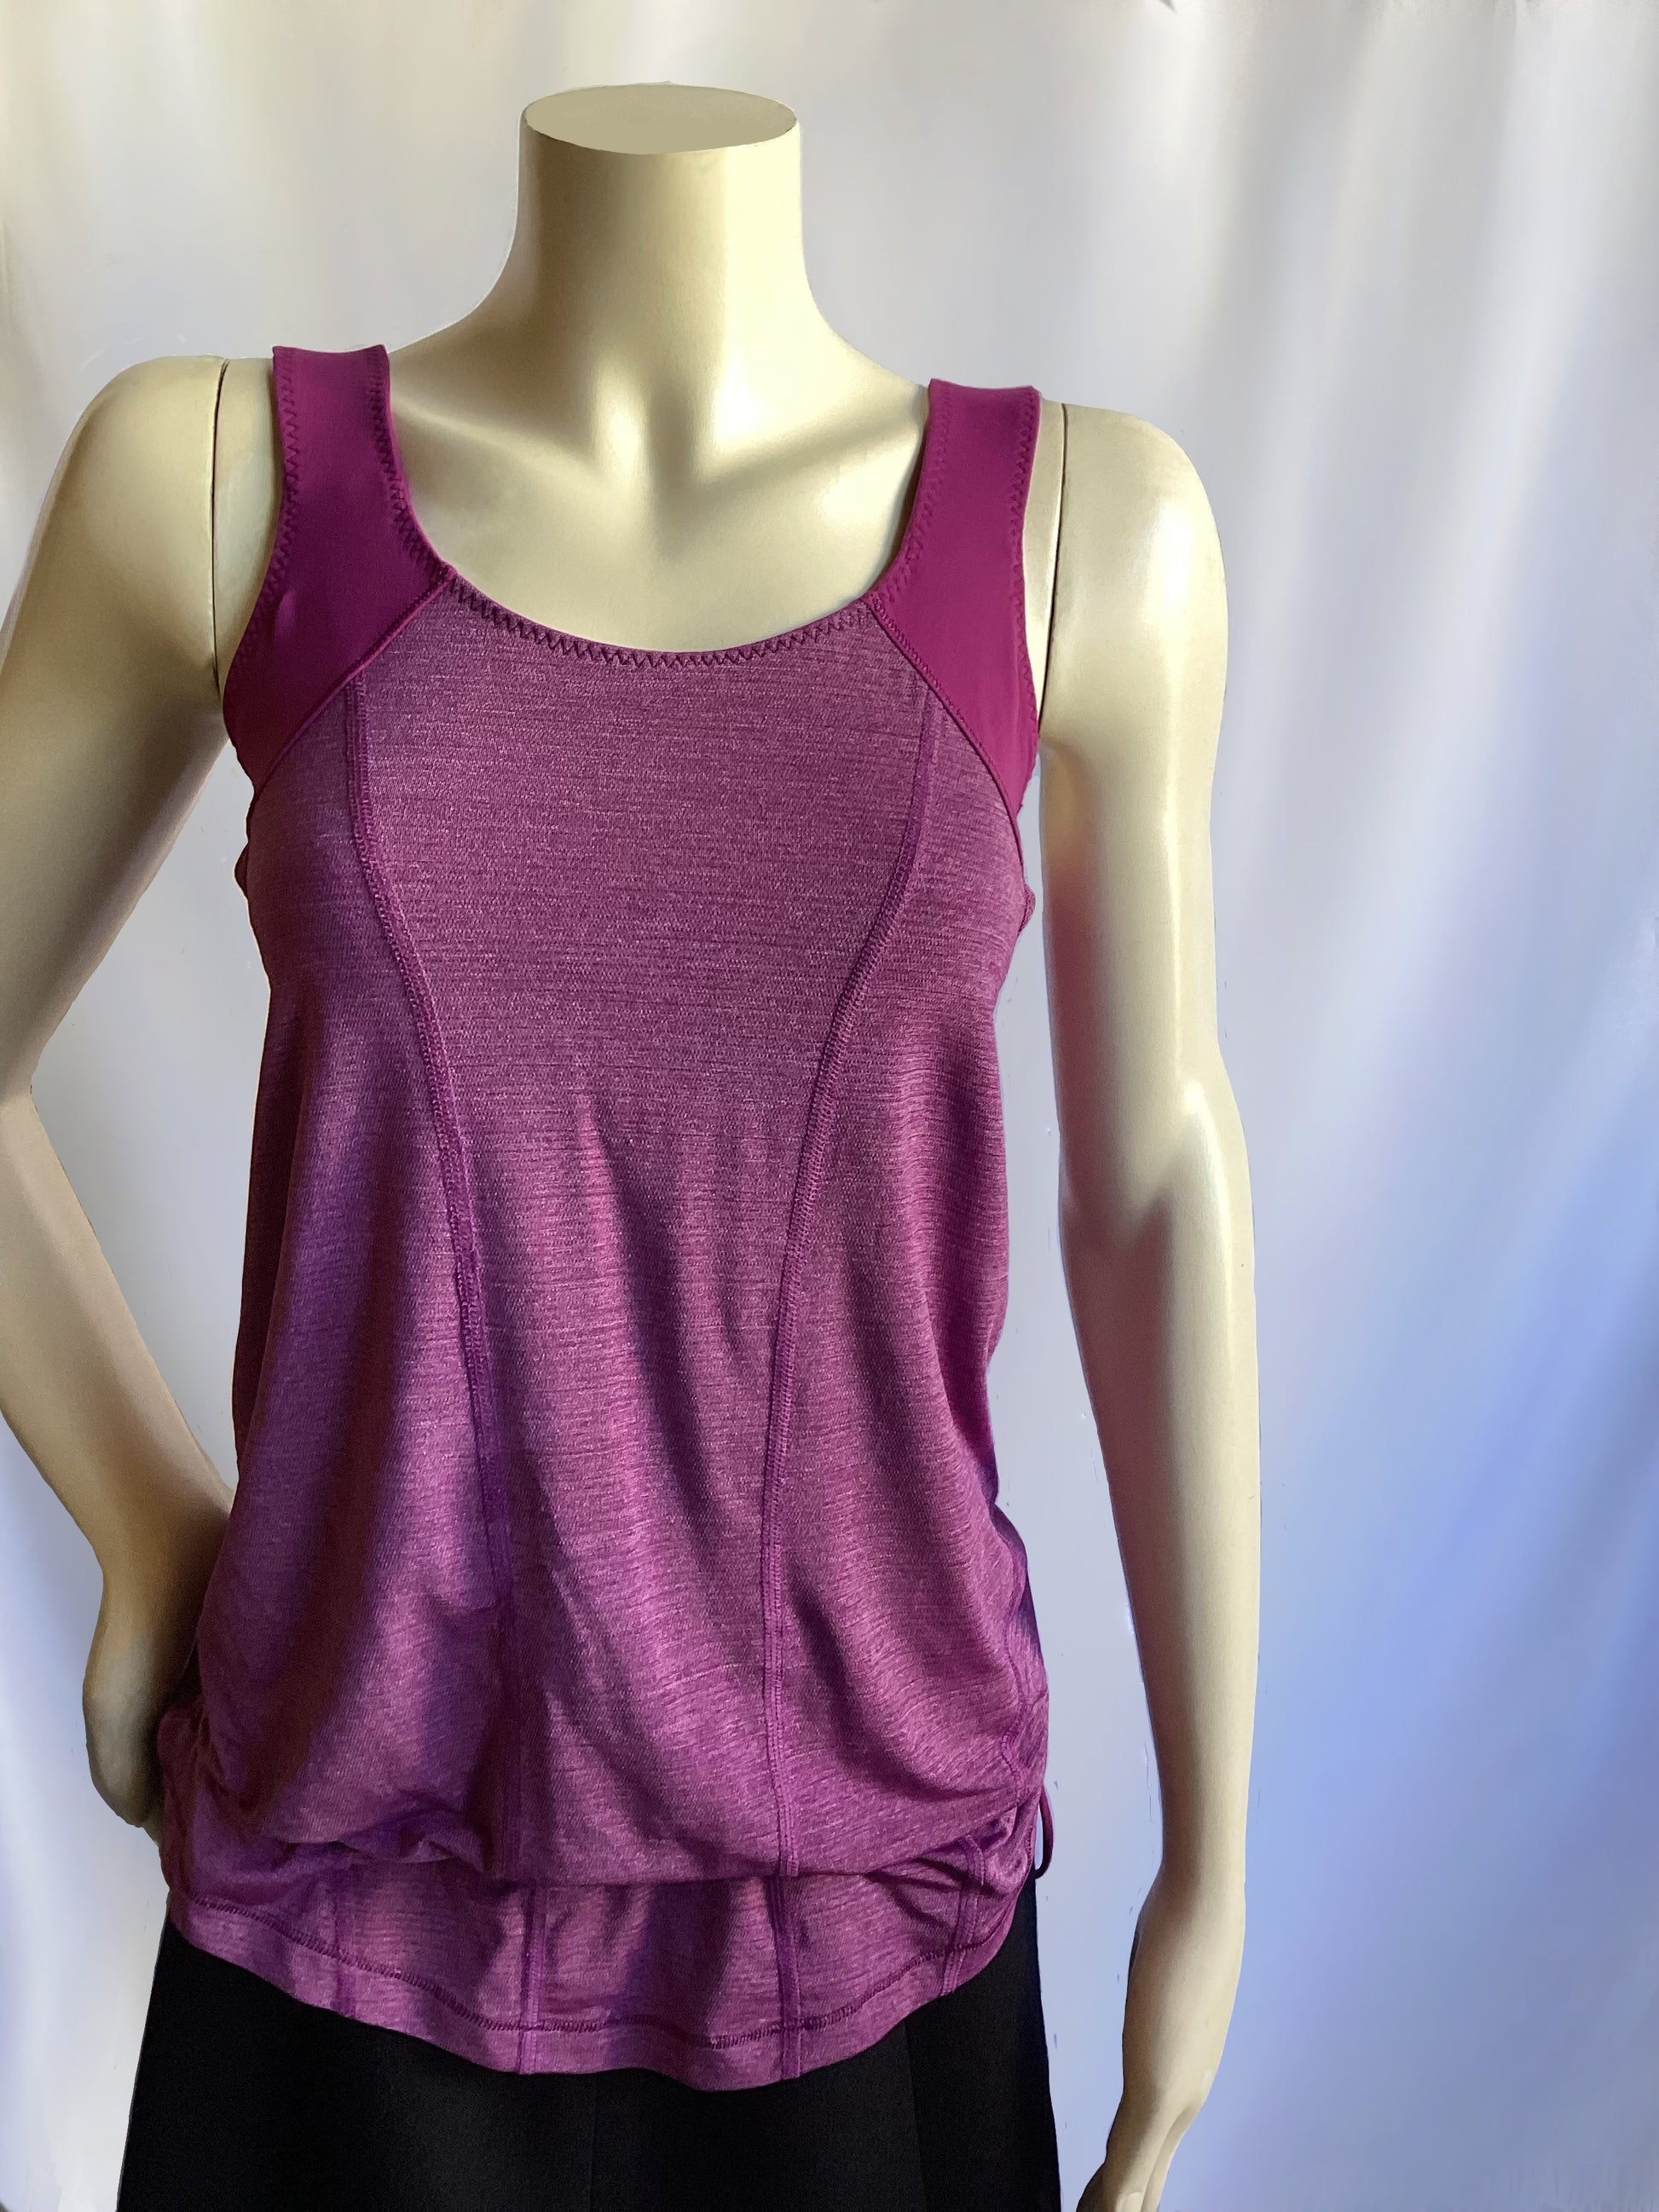 Lululemon Workout Top With Built In Brad